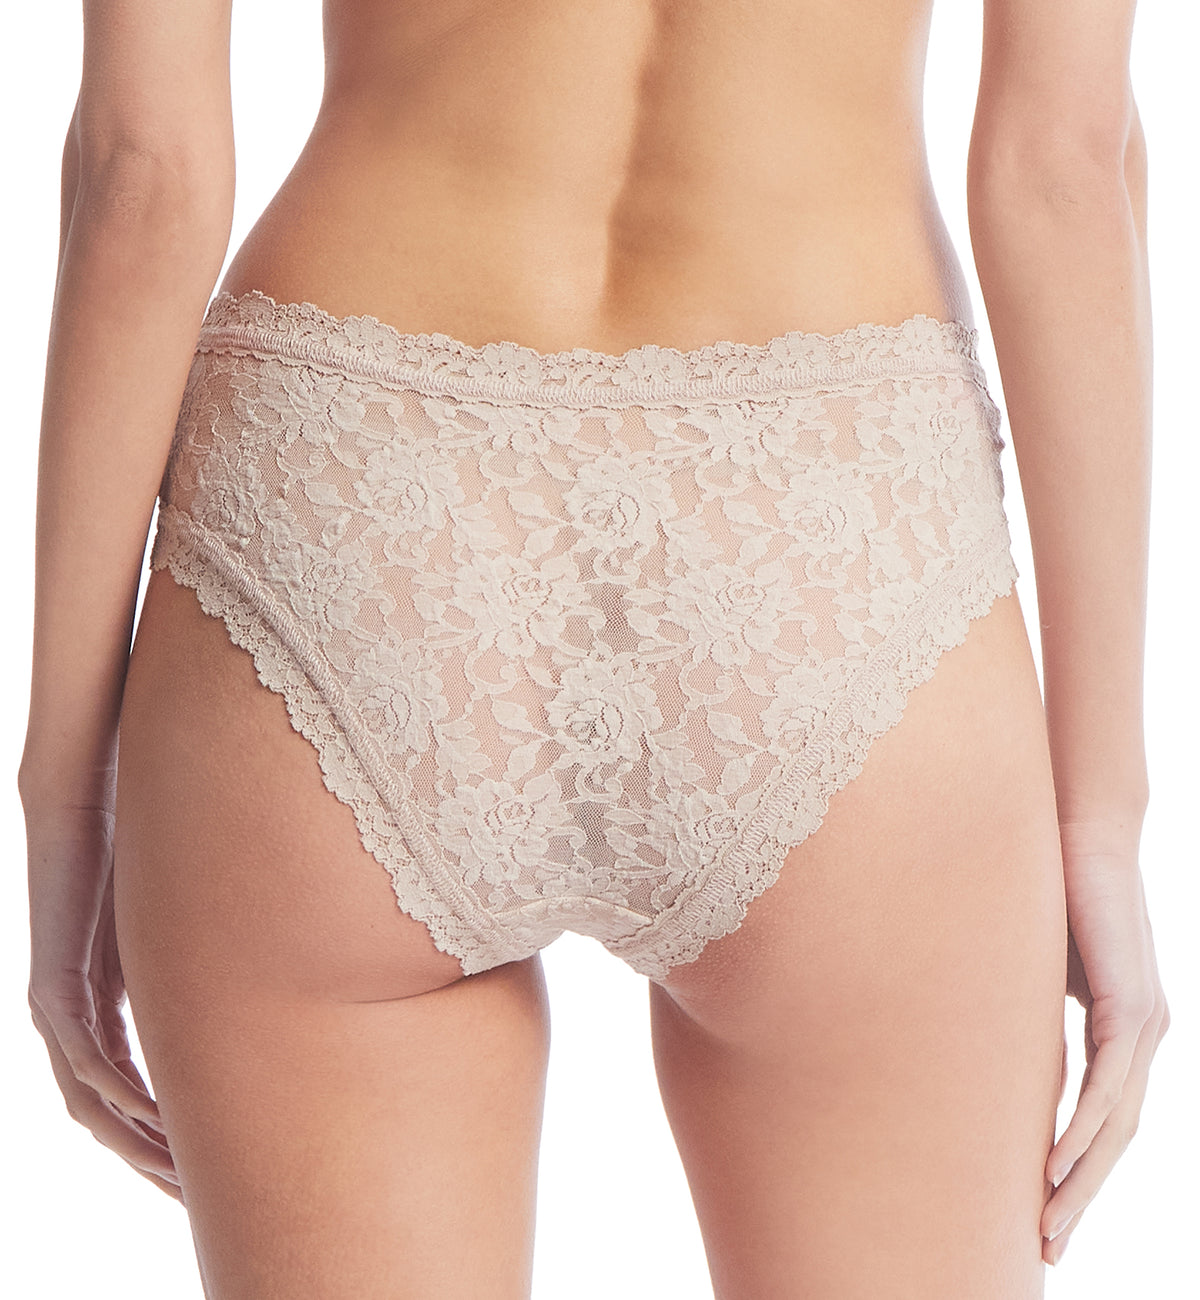 Hanky Panky Signature Lace V-Front Cheeky Brief (482454),XS,Chai - Chai,XS